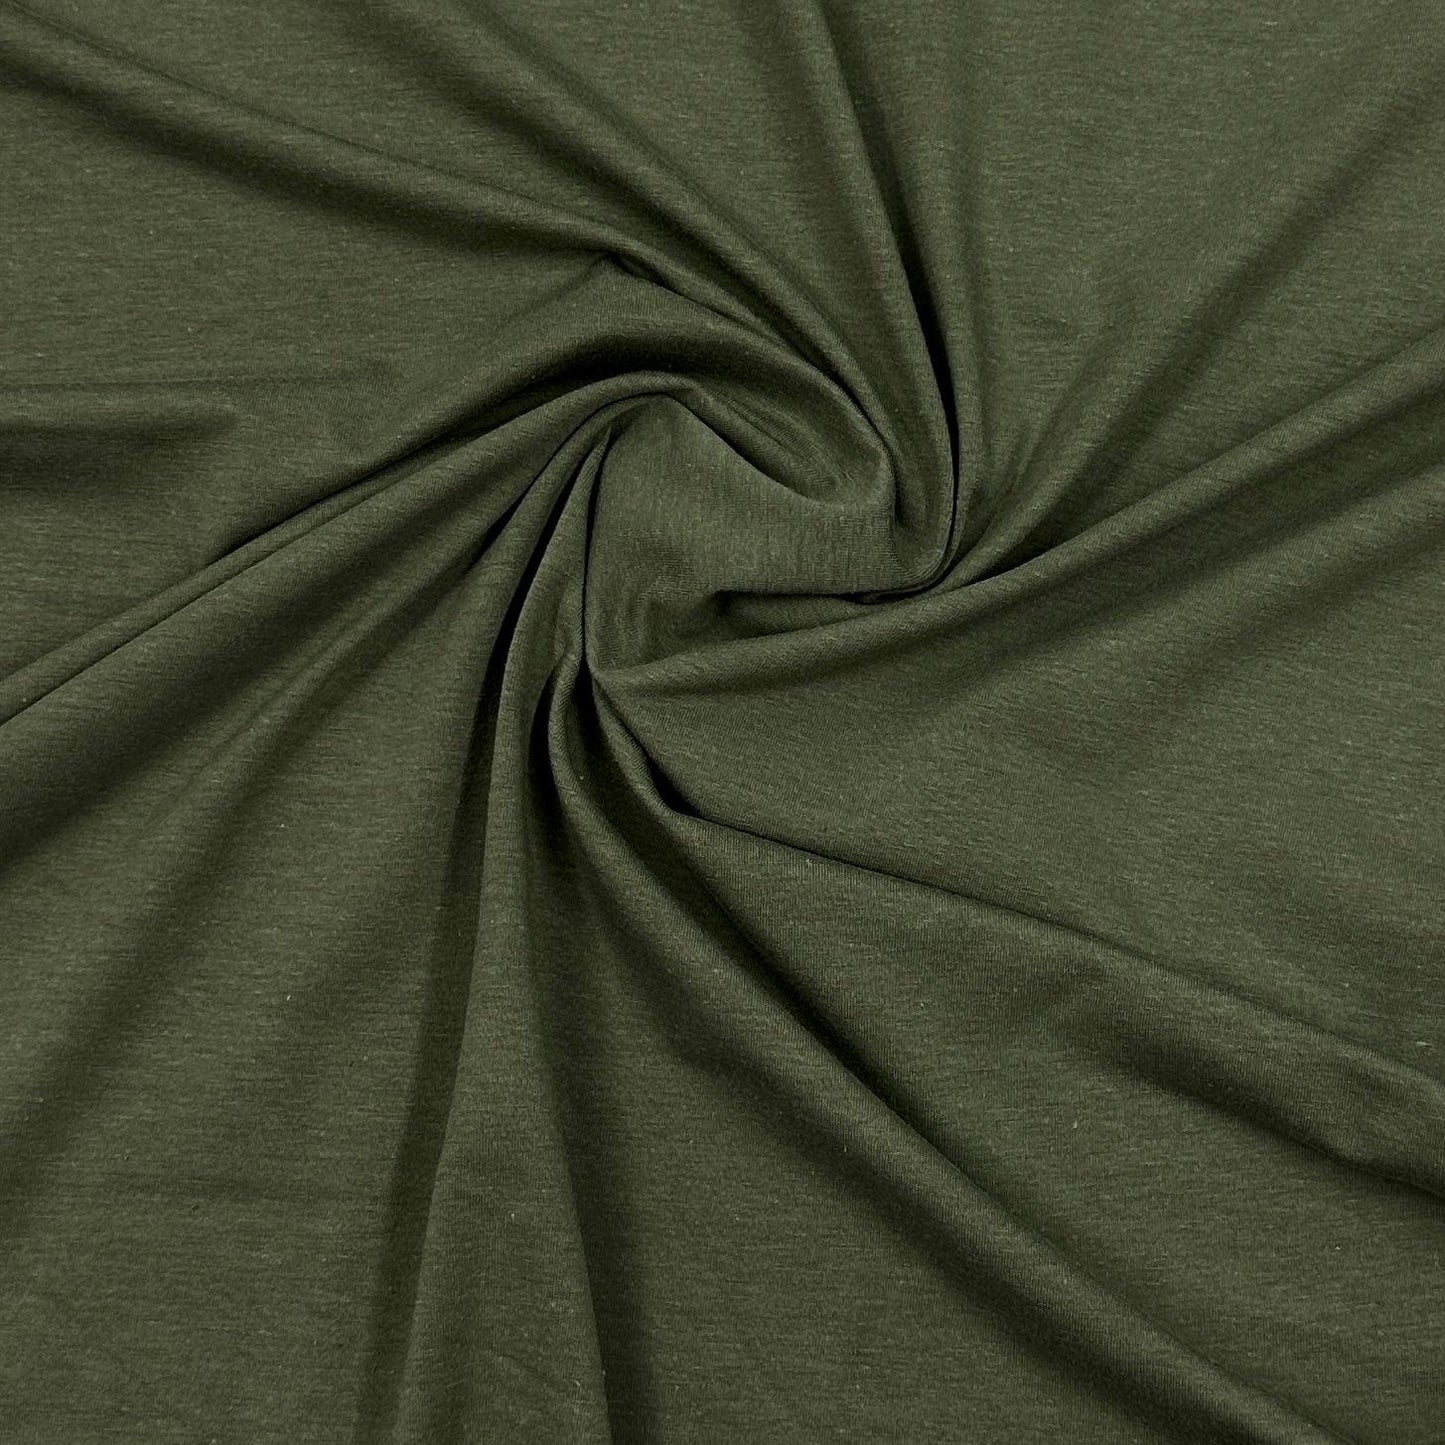 Burnt Olive Bamboo/Spandex Jersey Fabric - 265 GSM - Knit in the USA - Nature's Fabrics